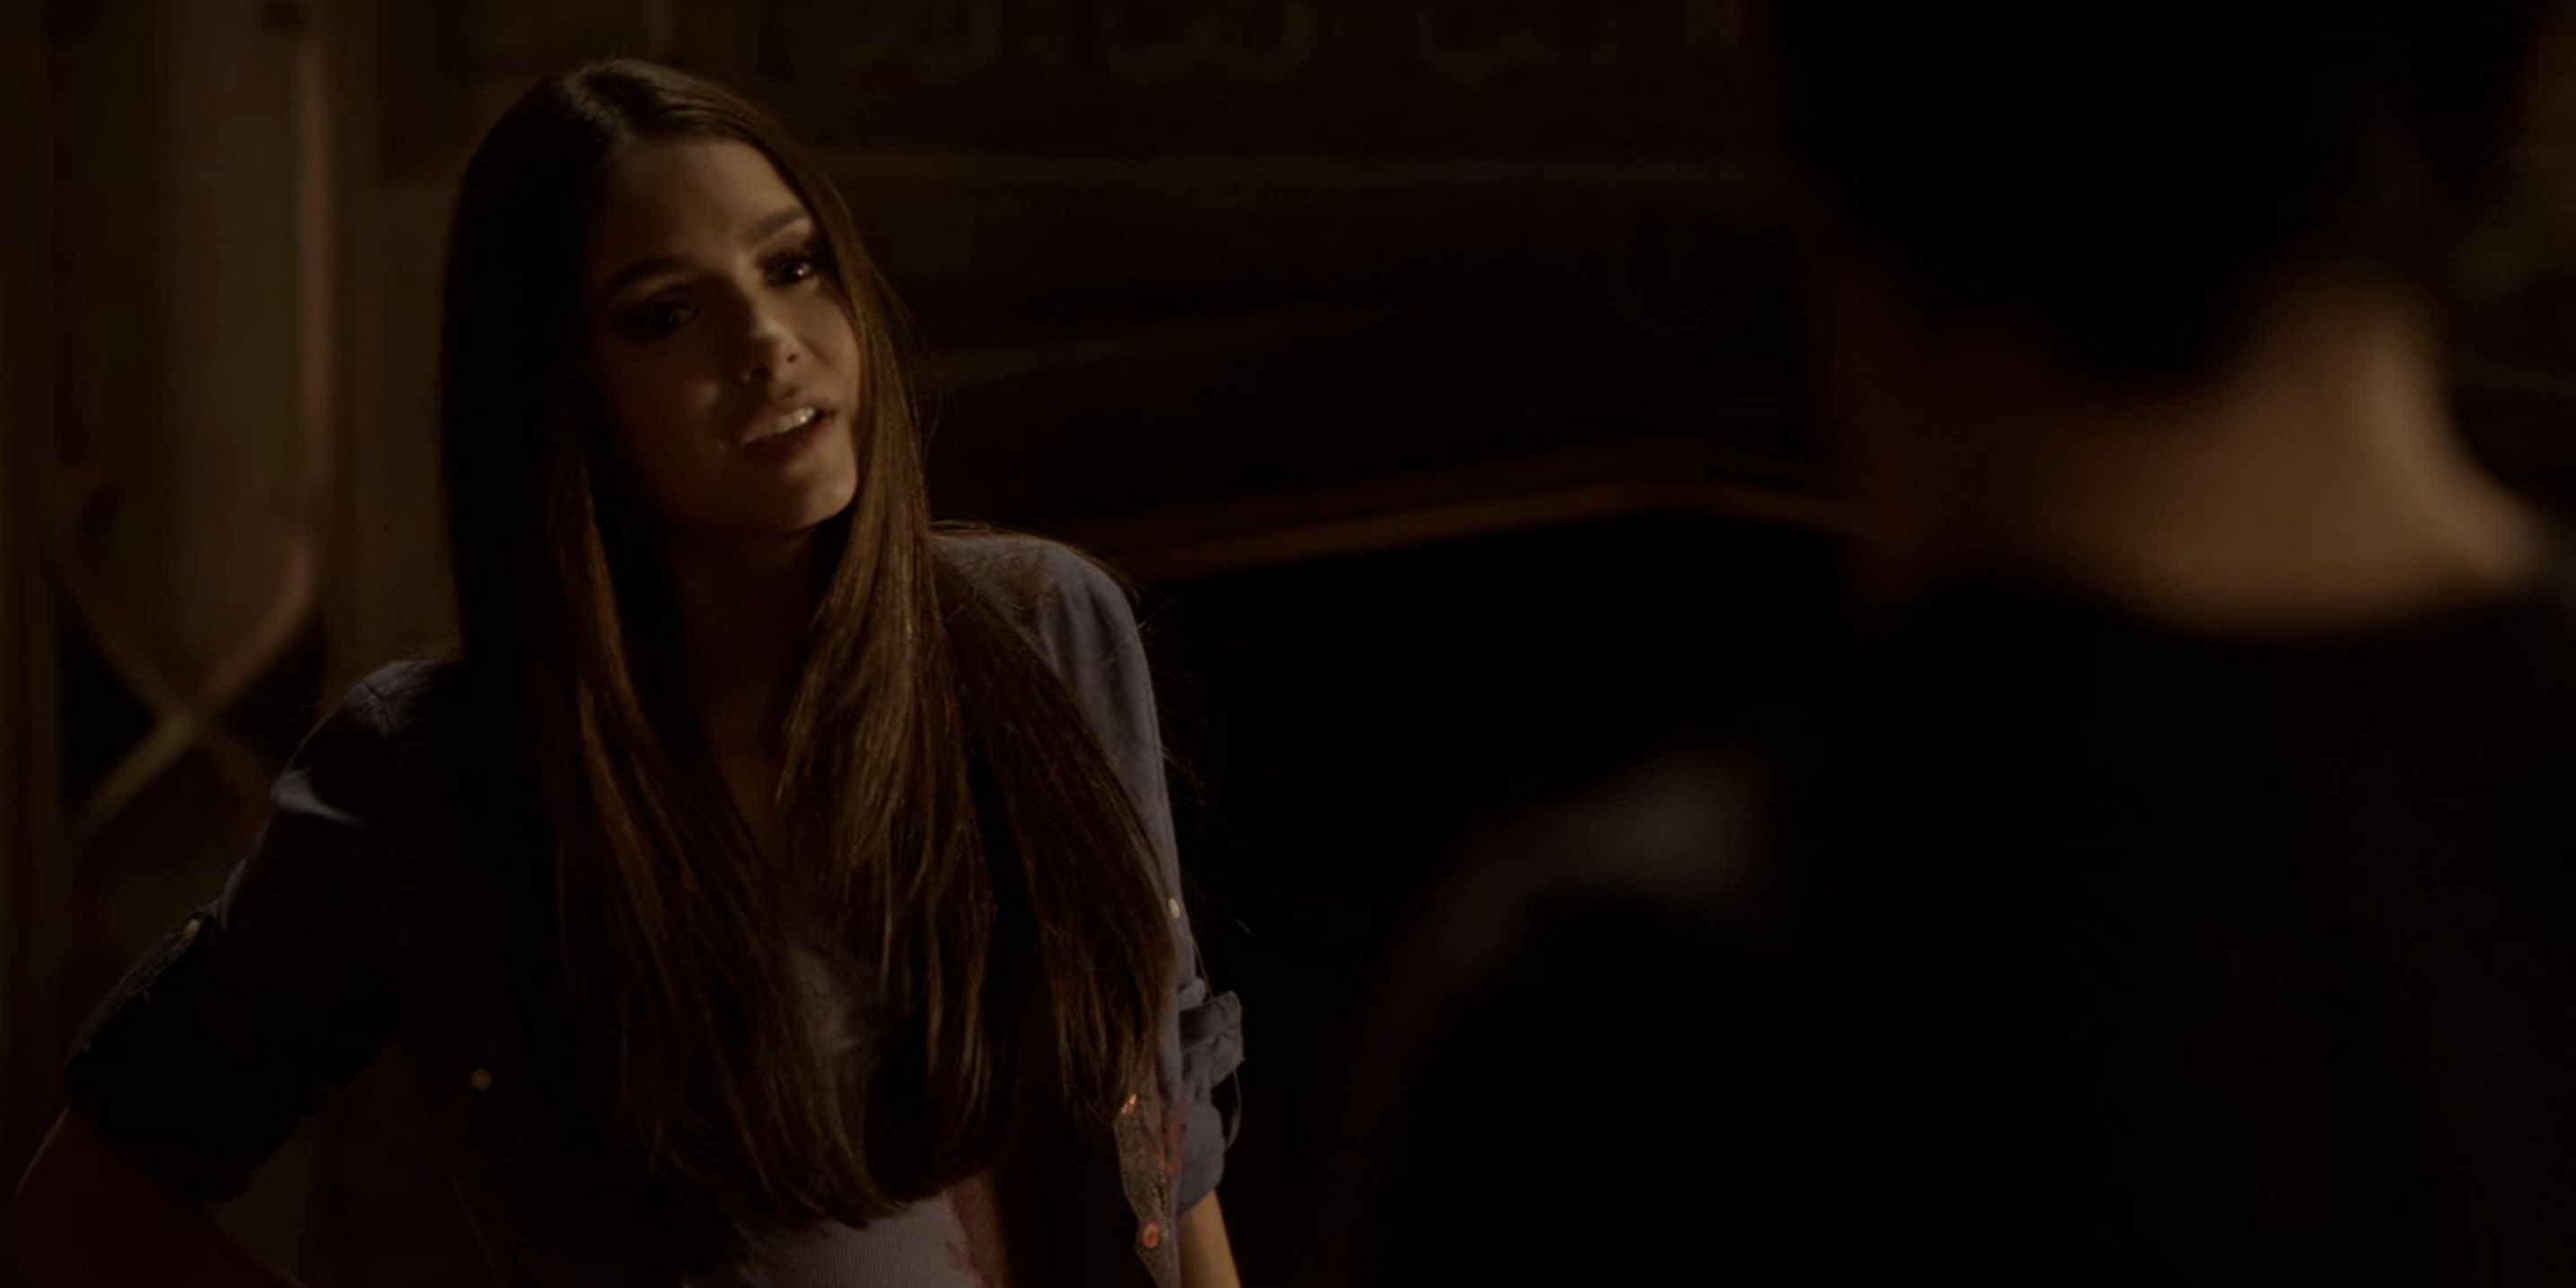 Katherine tells Damon about her deal to save Stefan in The Vampire Diaries.